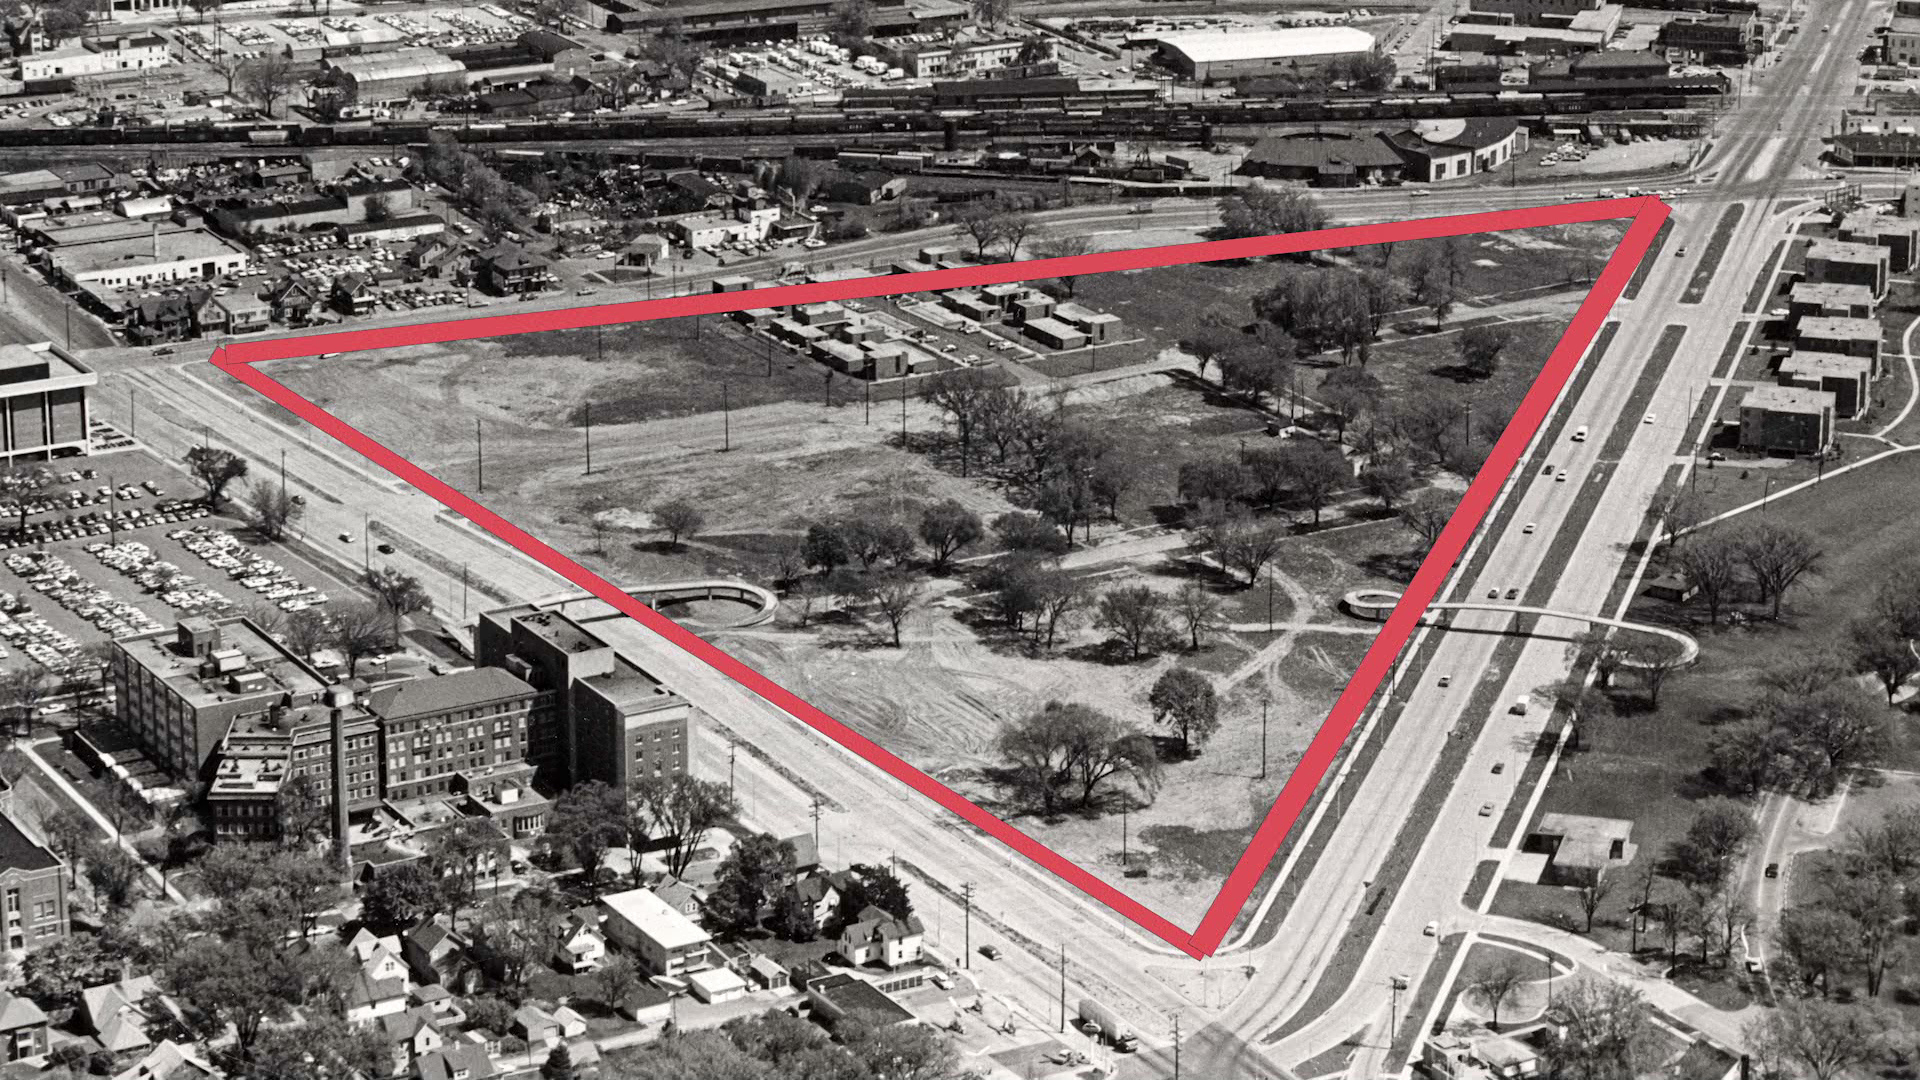 A black-and-white photo shows a red outline along the roads defining an area with trees and mostly empty lots that are surrounded by denser urban development.